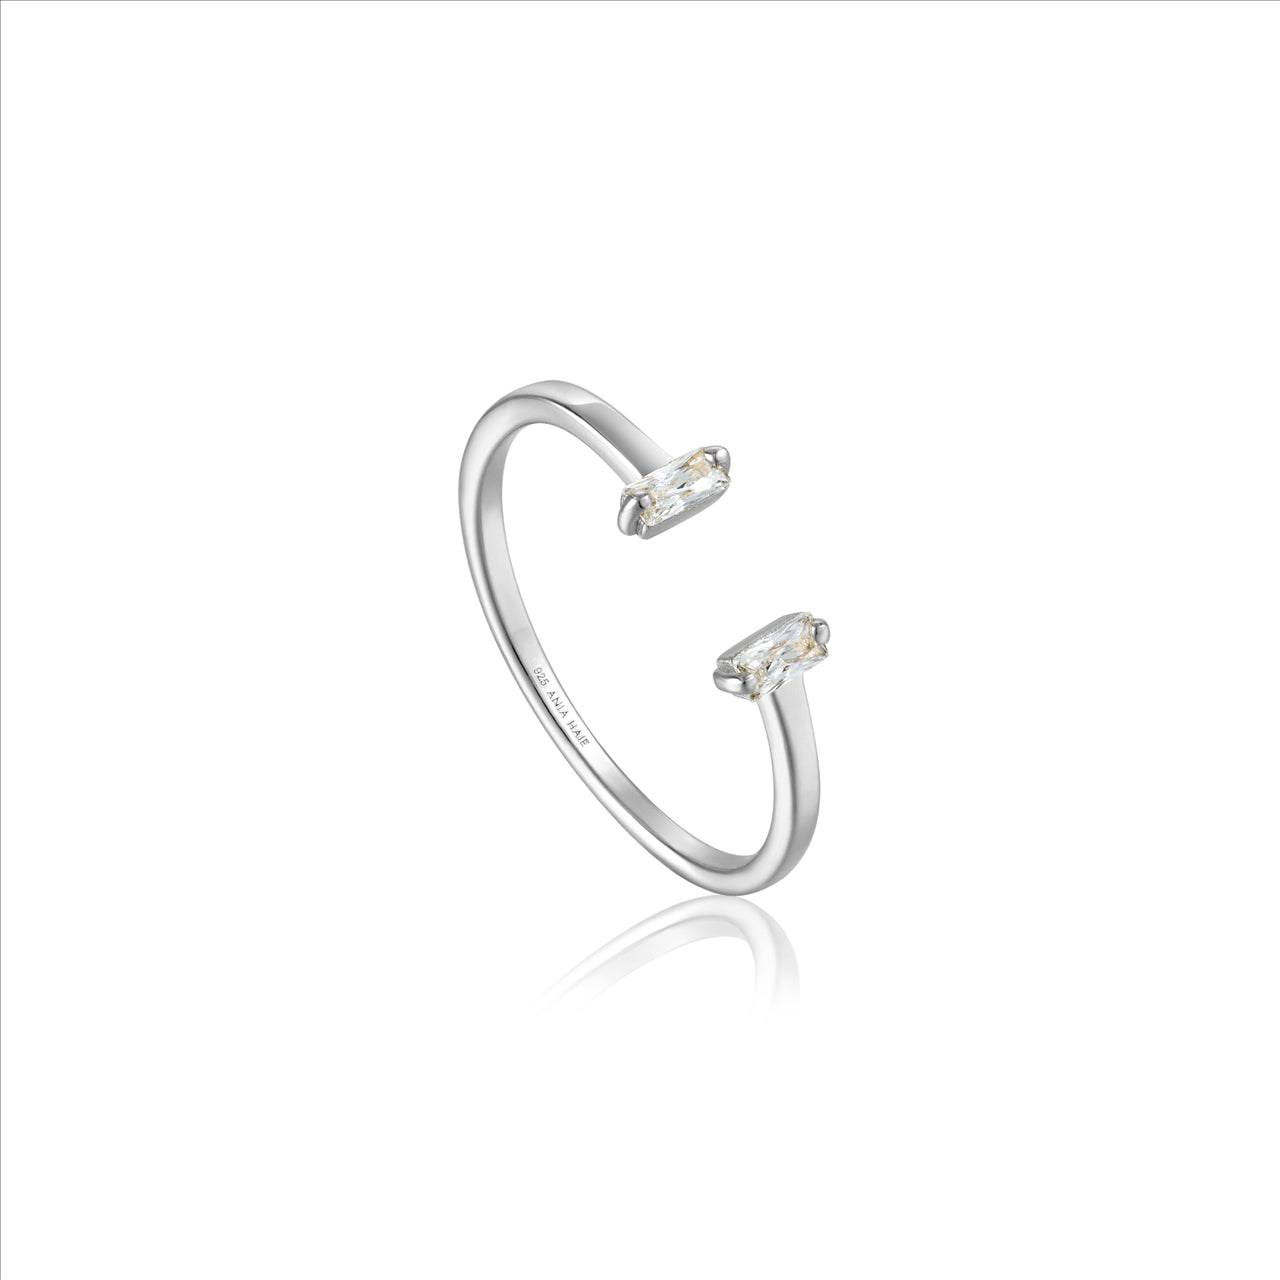 Ania Haie Silver Glow Adjustable Ring